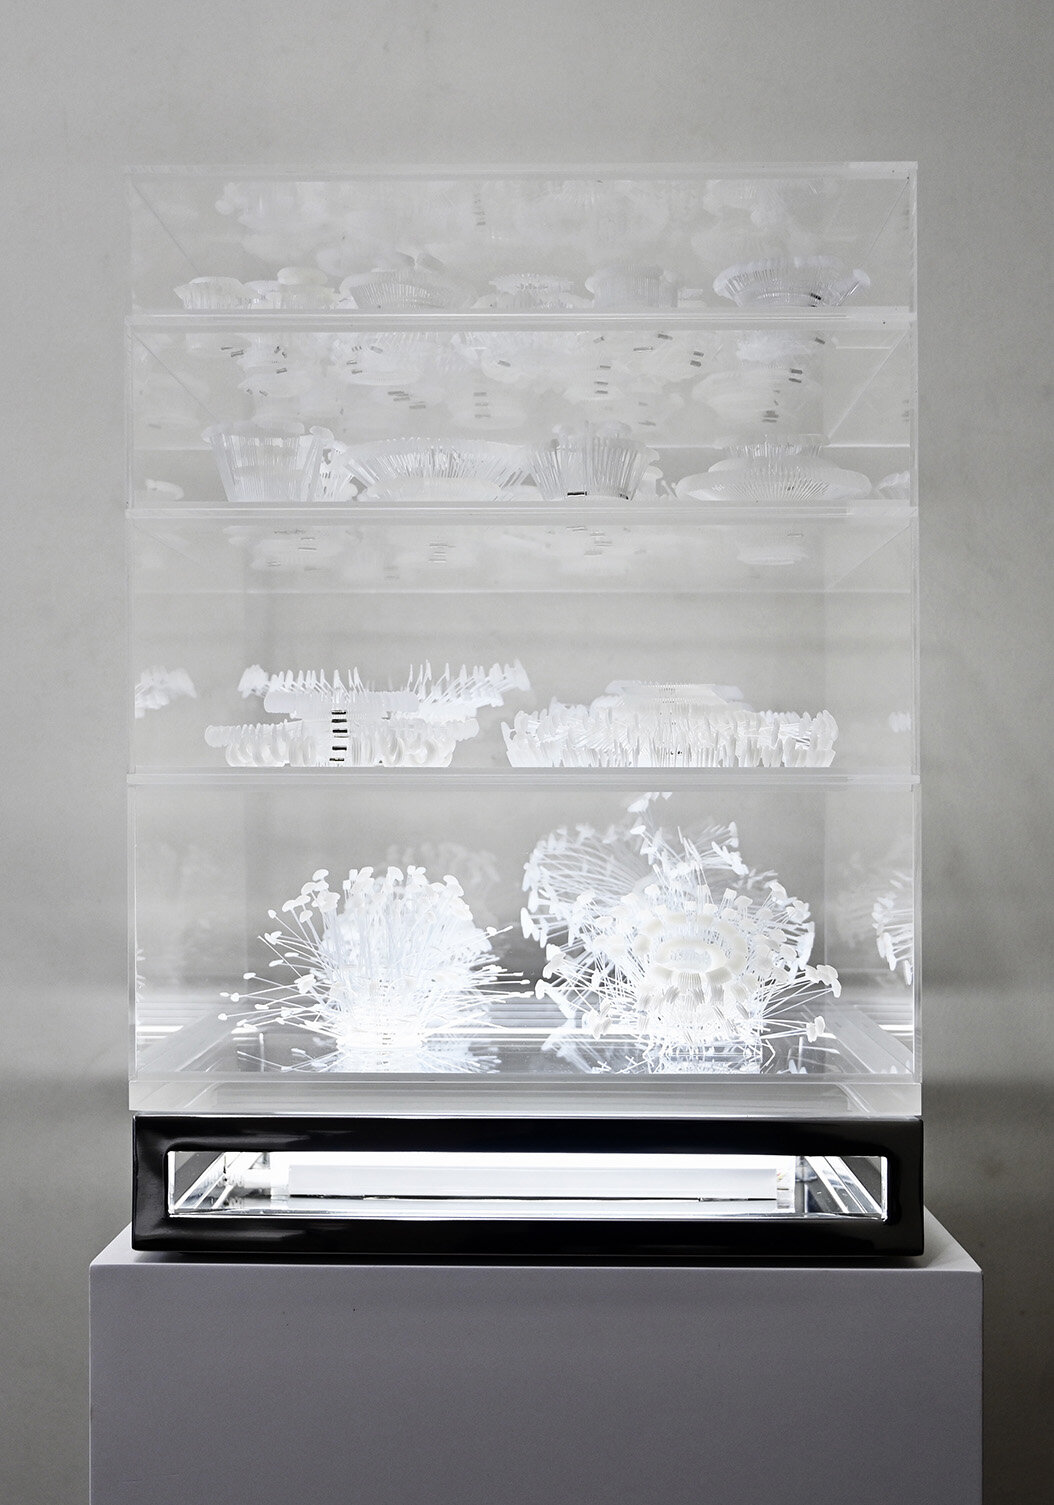  Grace TAN  Exotic Trophies  2020 Free-standing stainless steel and acrylic stacked structure with LED light and objects made from polyamide and polypropylene tag pins and nickel-plated brass tubes H54 x W40 x D40 cm Photography by Lim Weixiang  